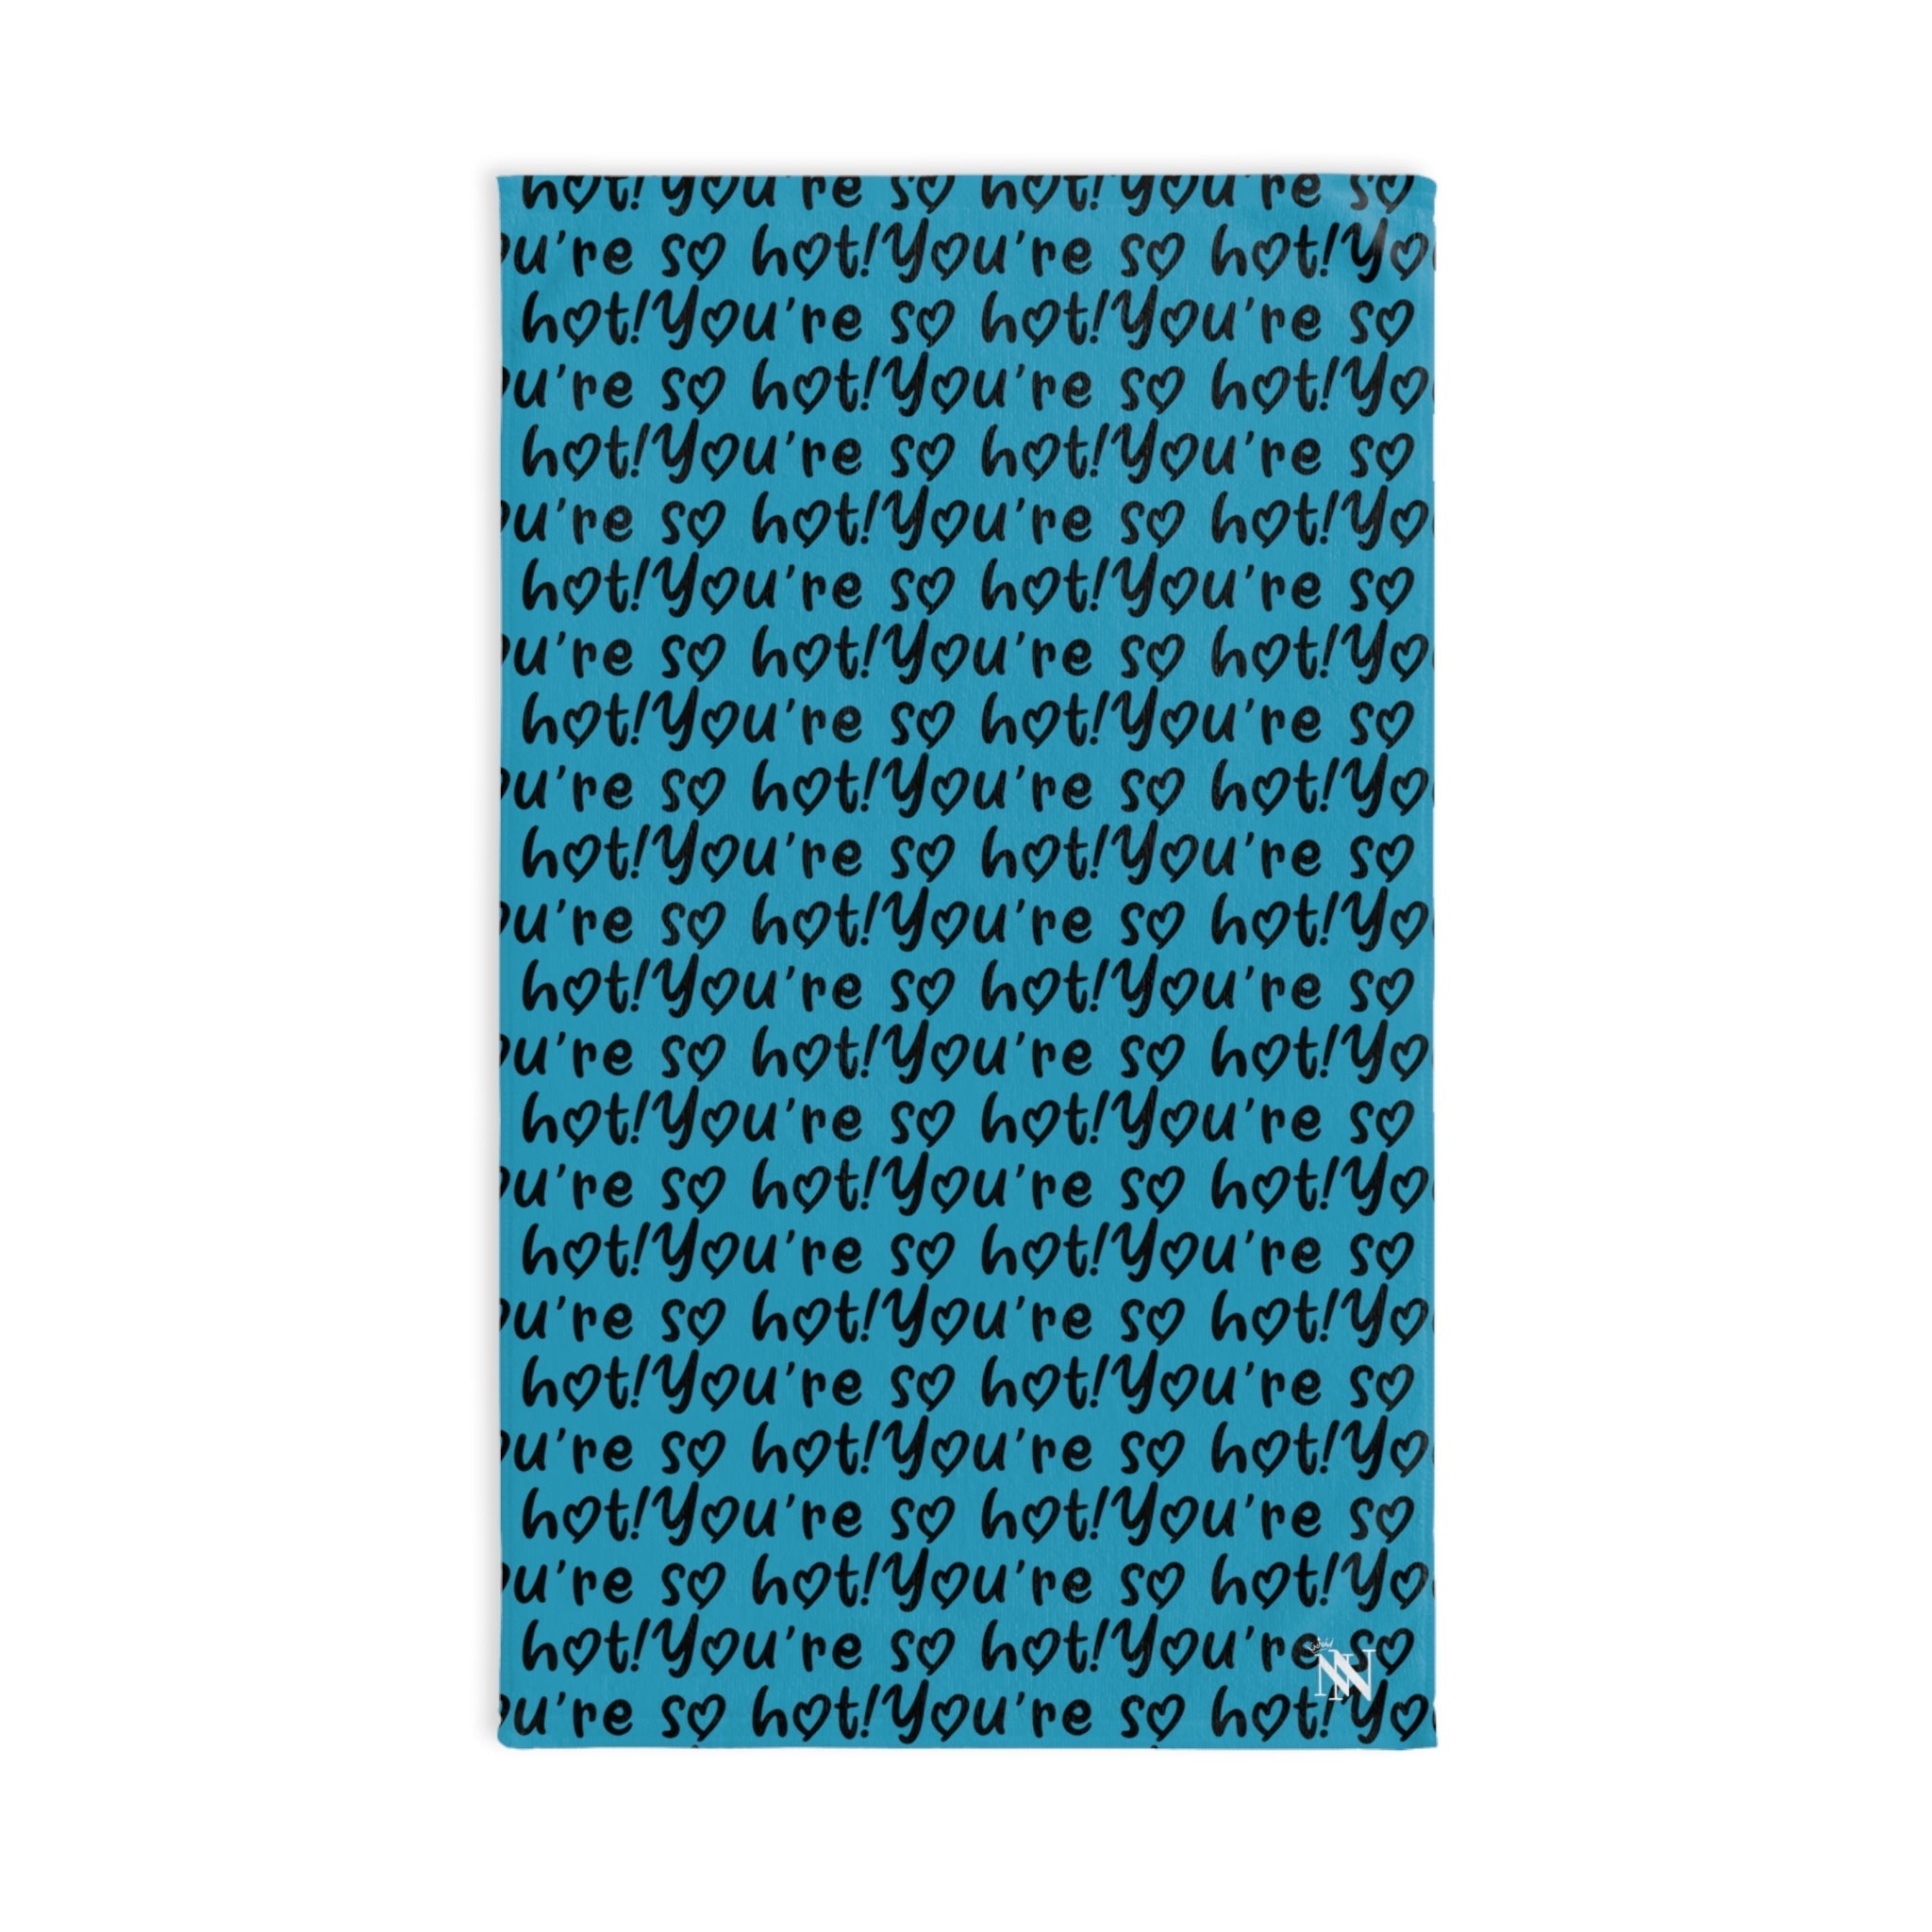 So Hot You're Pattern Teal | Novelty Gifts for Boyfriend, Funny Towel Romantic Gift for Wedding Couple Fiance First Year Anniversary Valentines, Party Gag Gifts, Joke Humor Cloth for Husband Men BF NECTAR NAPKINS